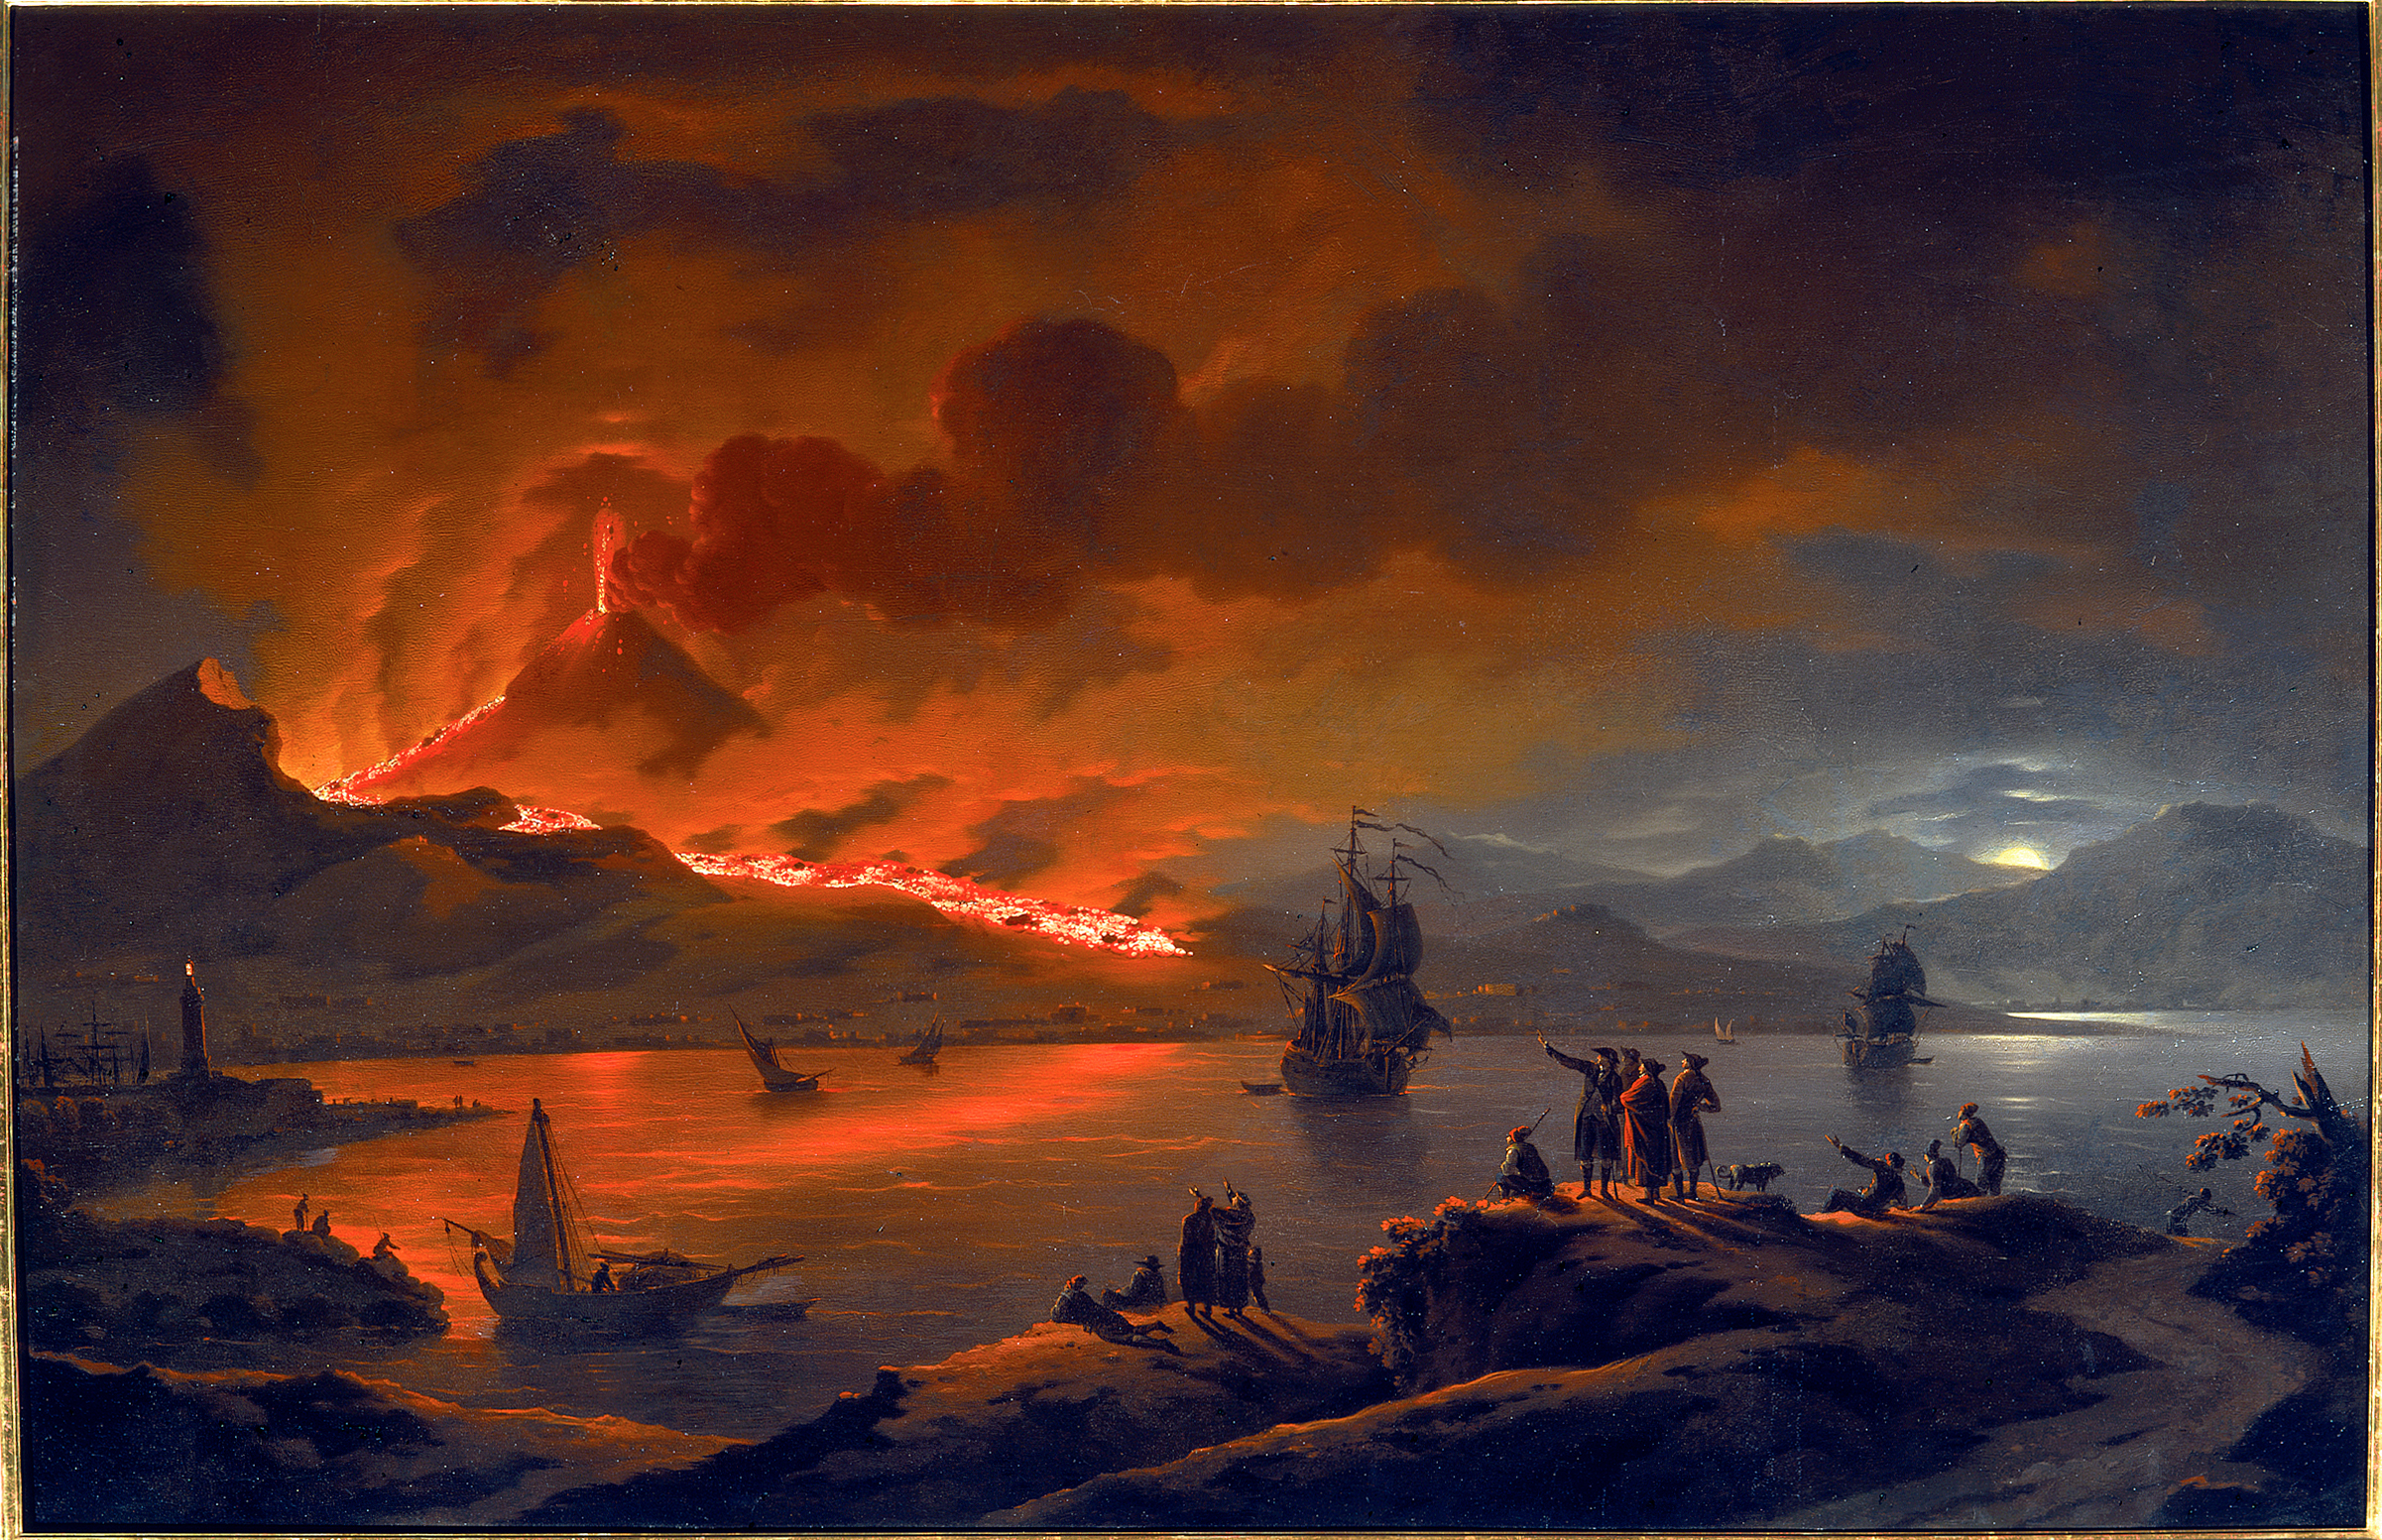 Michael Wutky, Eruption of Vesuvius, seen across the Golf of Naples, c. 1780 © Paintings Gallery of the Academy of Fine Arts Vienna